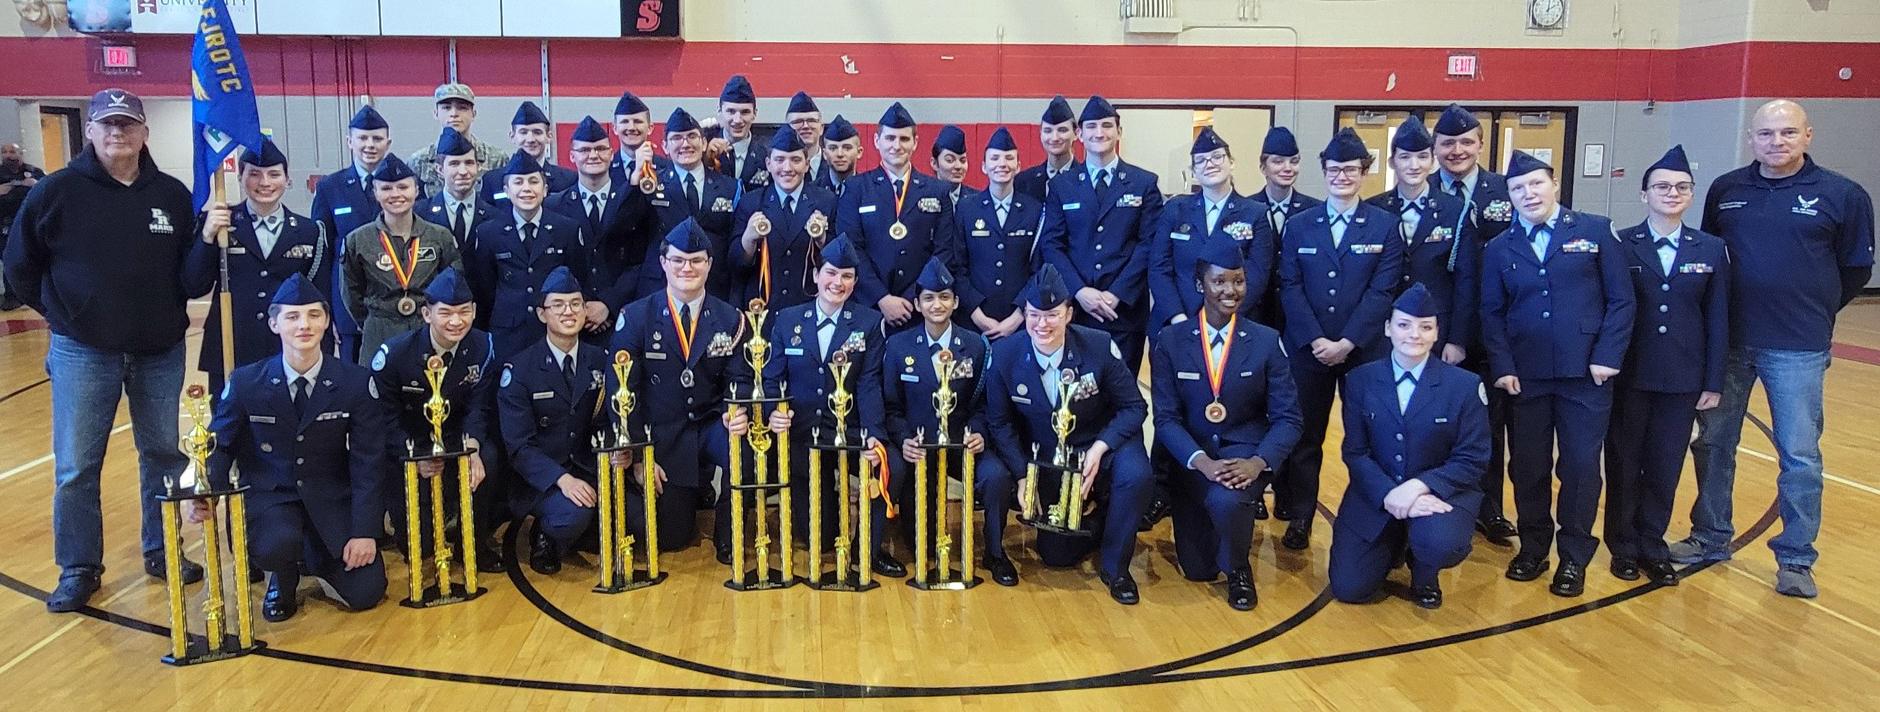 Pine-Richland/Mars Area U.S. Air Force JROTC (Junior Reserve Officers Training Corp) Drill Teams earned first place overall at the  East CLC Marine Corps Drill Competition.